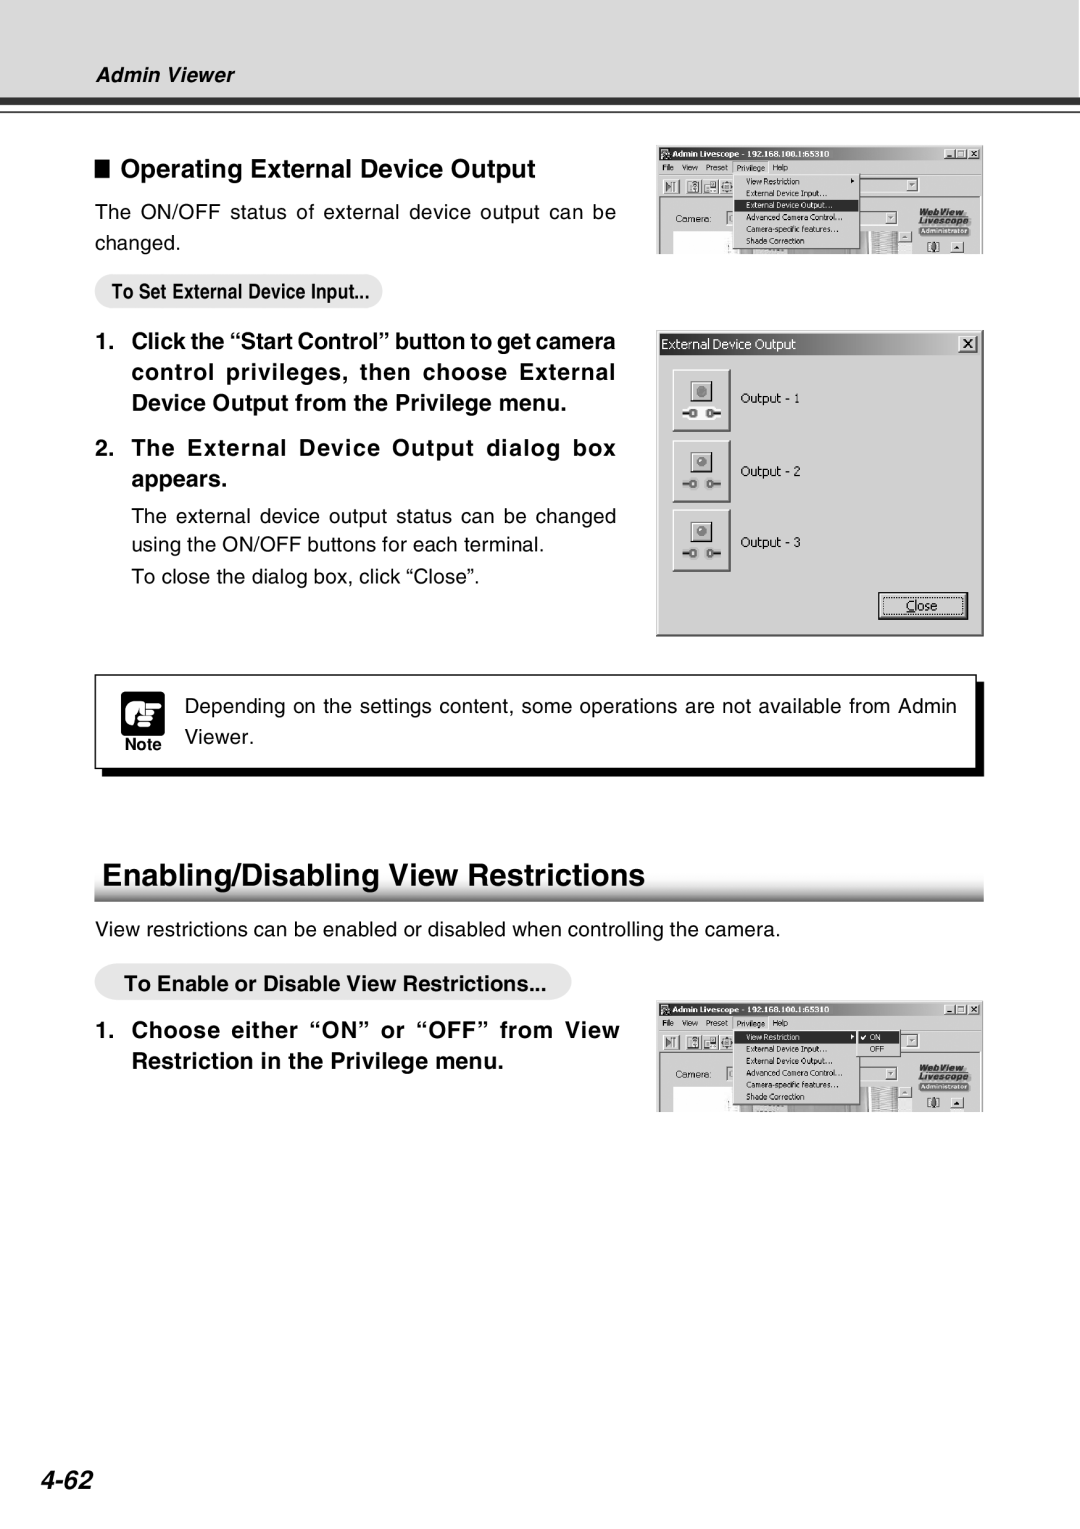 Canon Vb-C50fi user manual Enabling/Disabling View Restrictions, Operating External Device Output, 4-62, Admin Viewer 